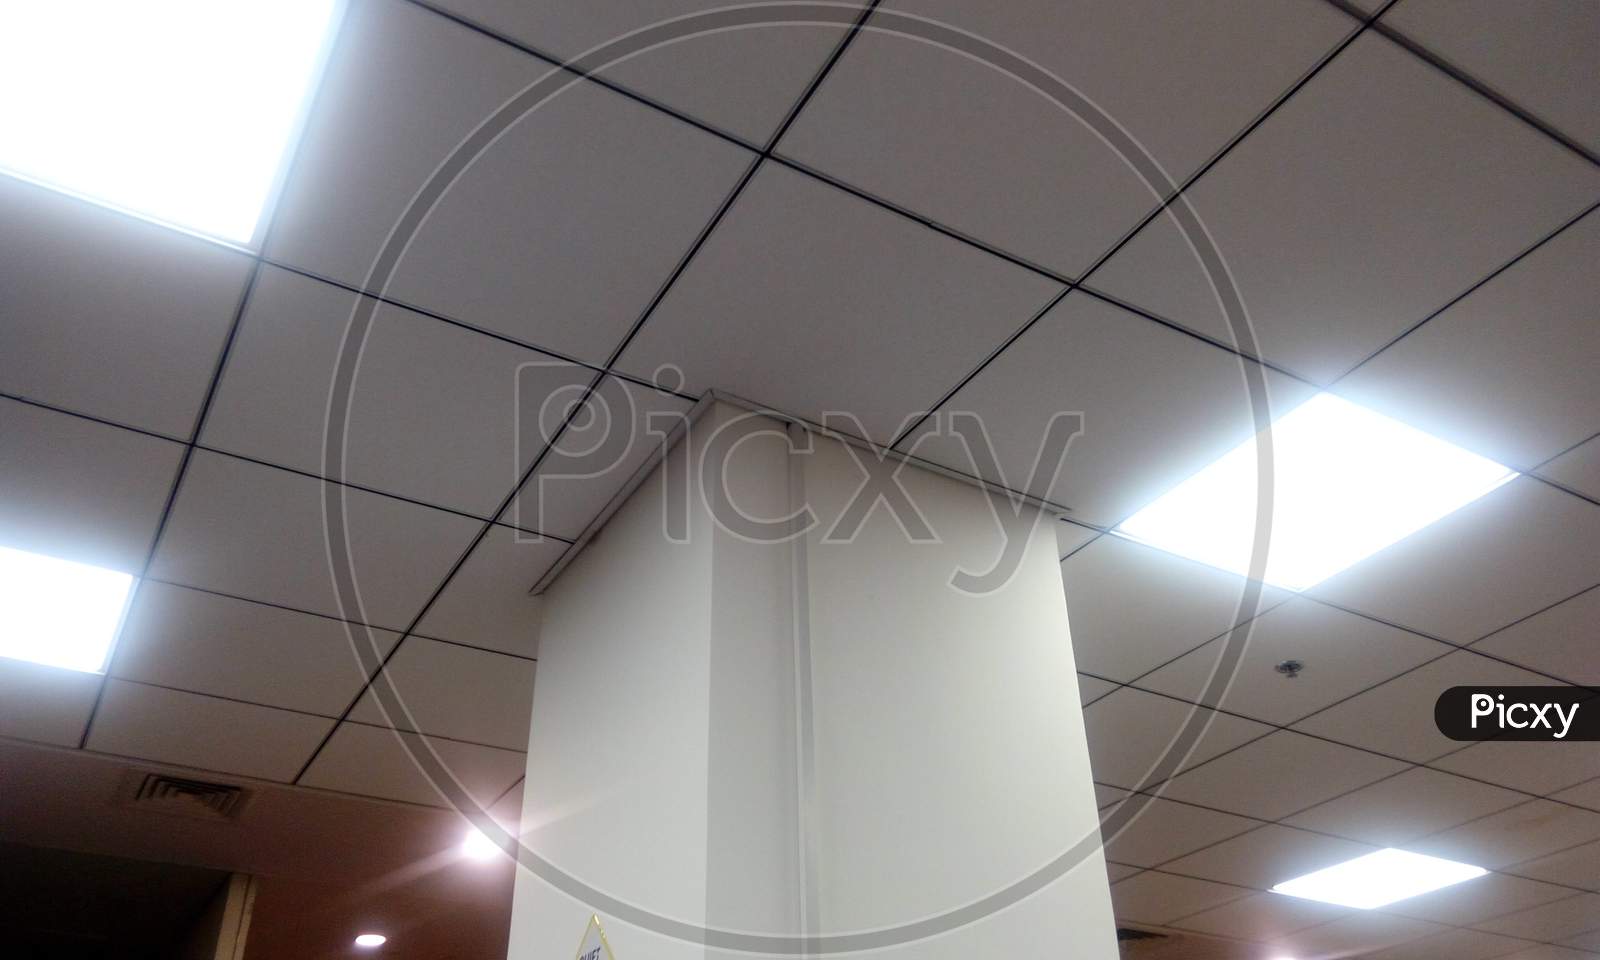 Image Of Office Building False Ceiling Of Calcium Silicate Suspended Grid False Ceiling With 60 X 60 Cm Grid Lighting Around The White Emulsion Painted Column Structure With Necessary Cut Pieces Of